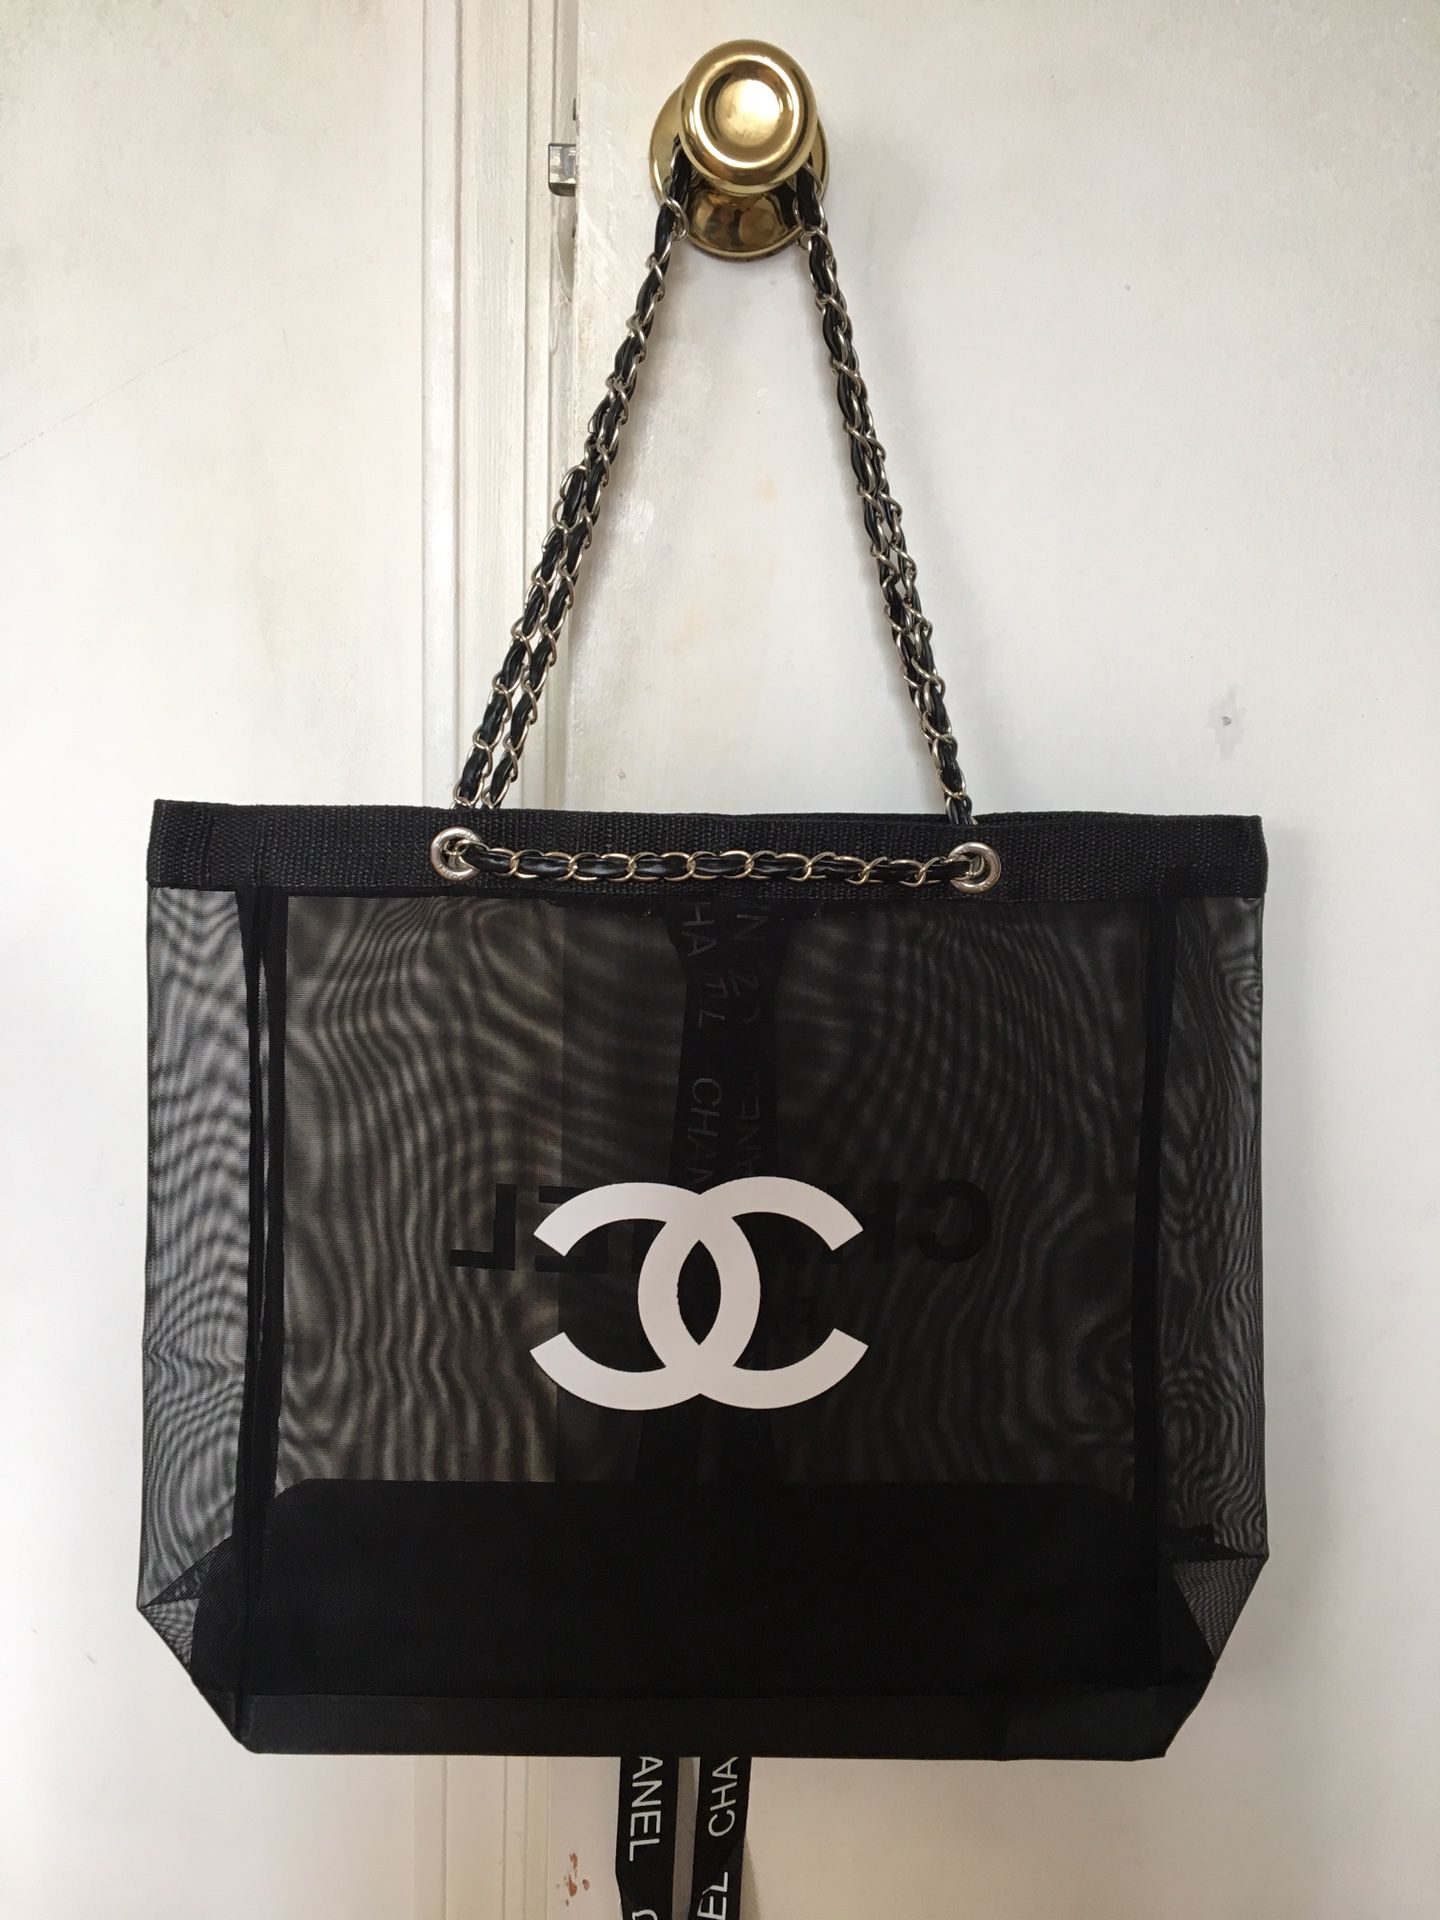 *ONLY 1 LEFT** Authentic BRAND NEW/ NEVER USED VIP GIFT Chanel Mesh Tote! M